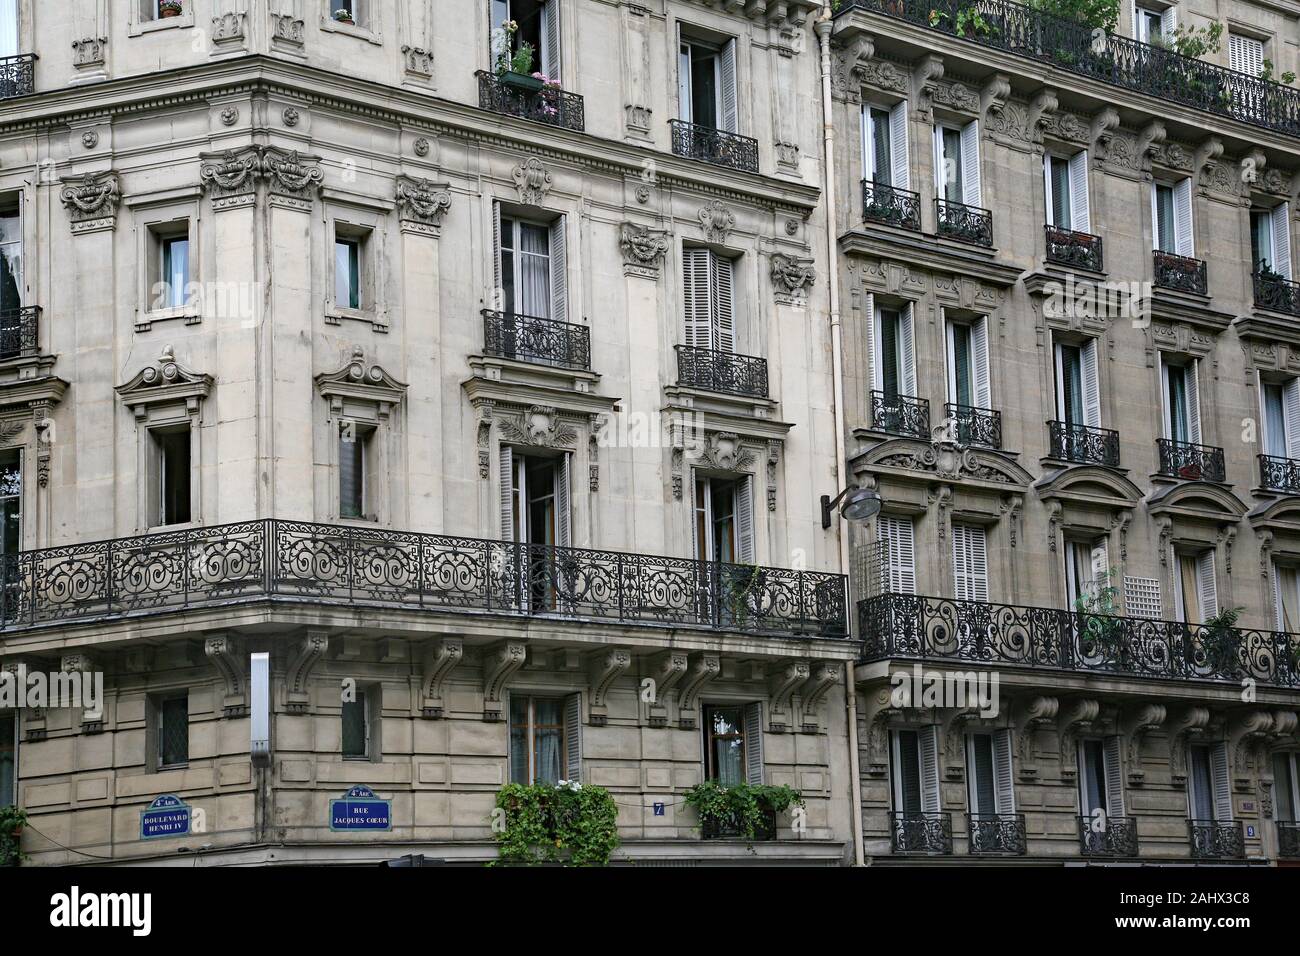 Paris, typical old apartment building with wrought iron balcony railings and planters Stock Photo